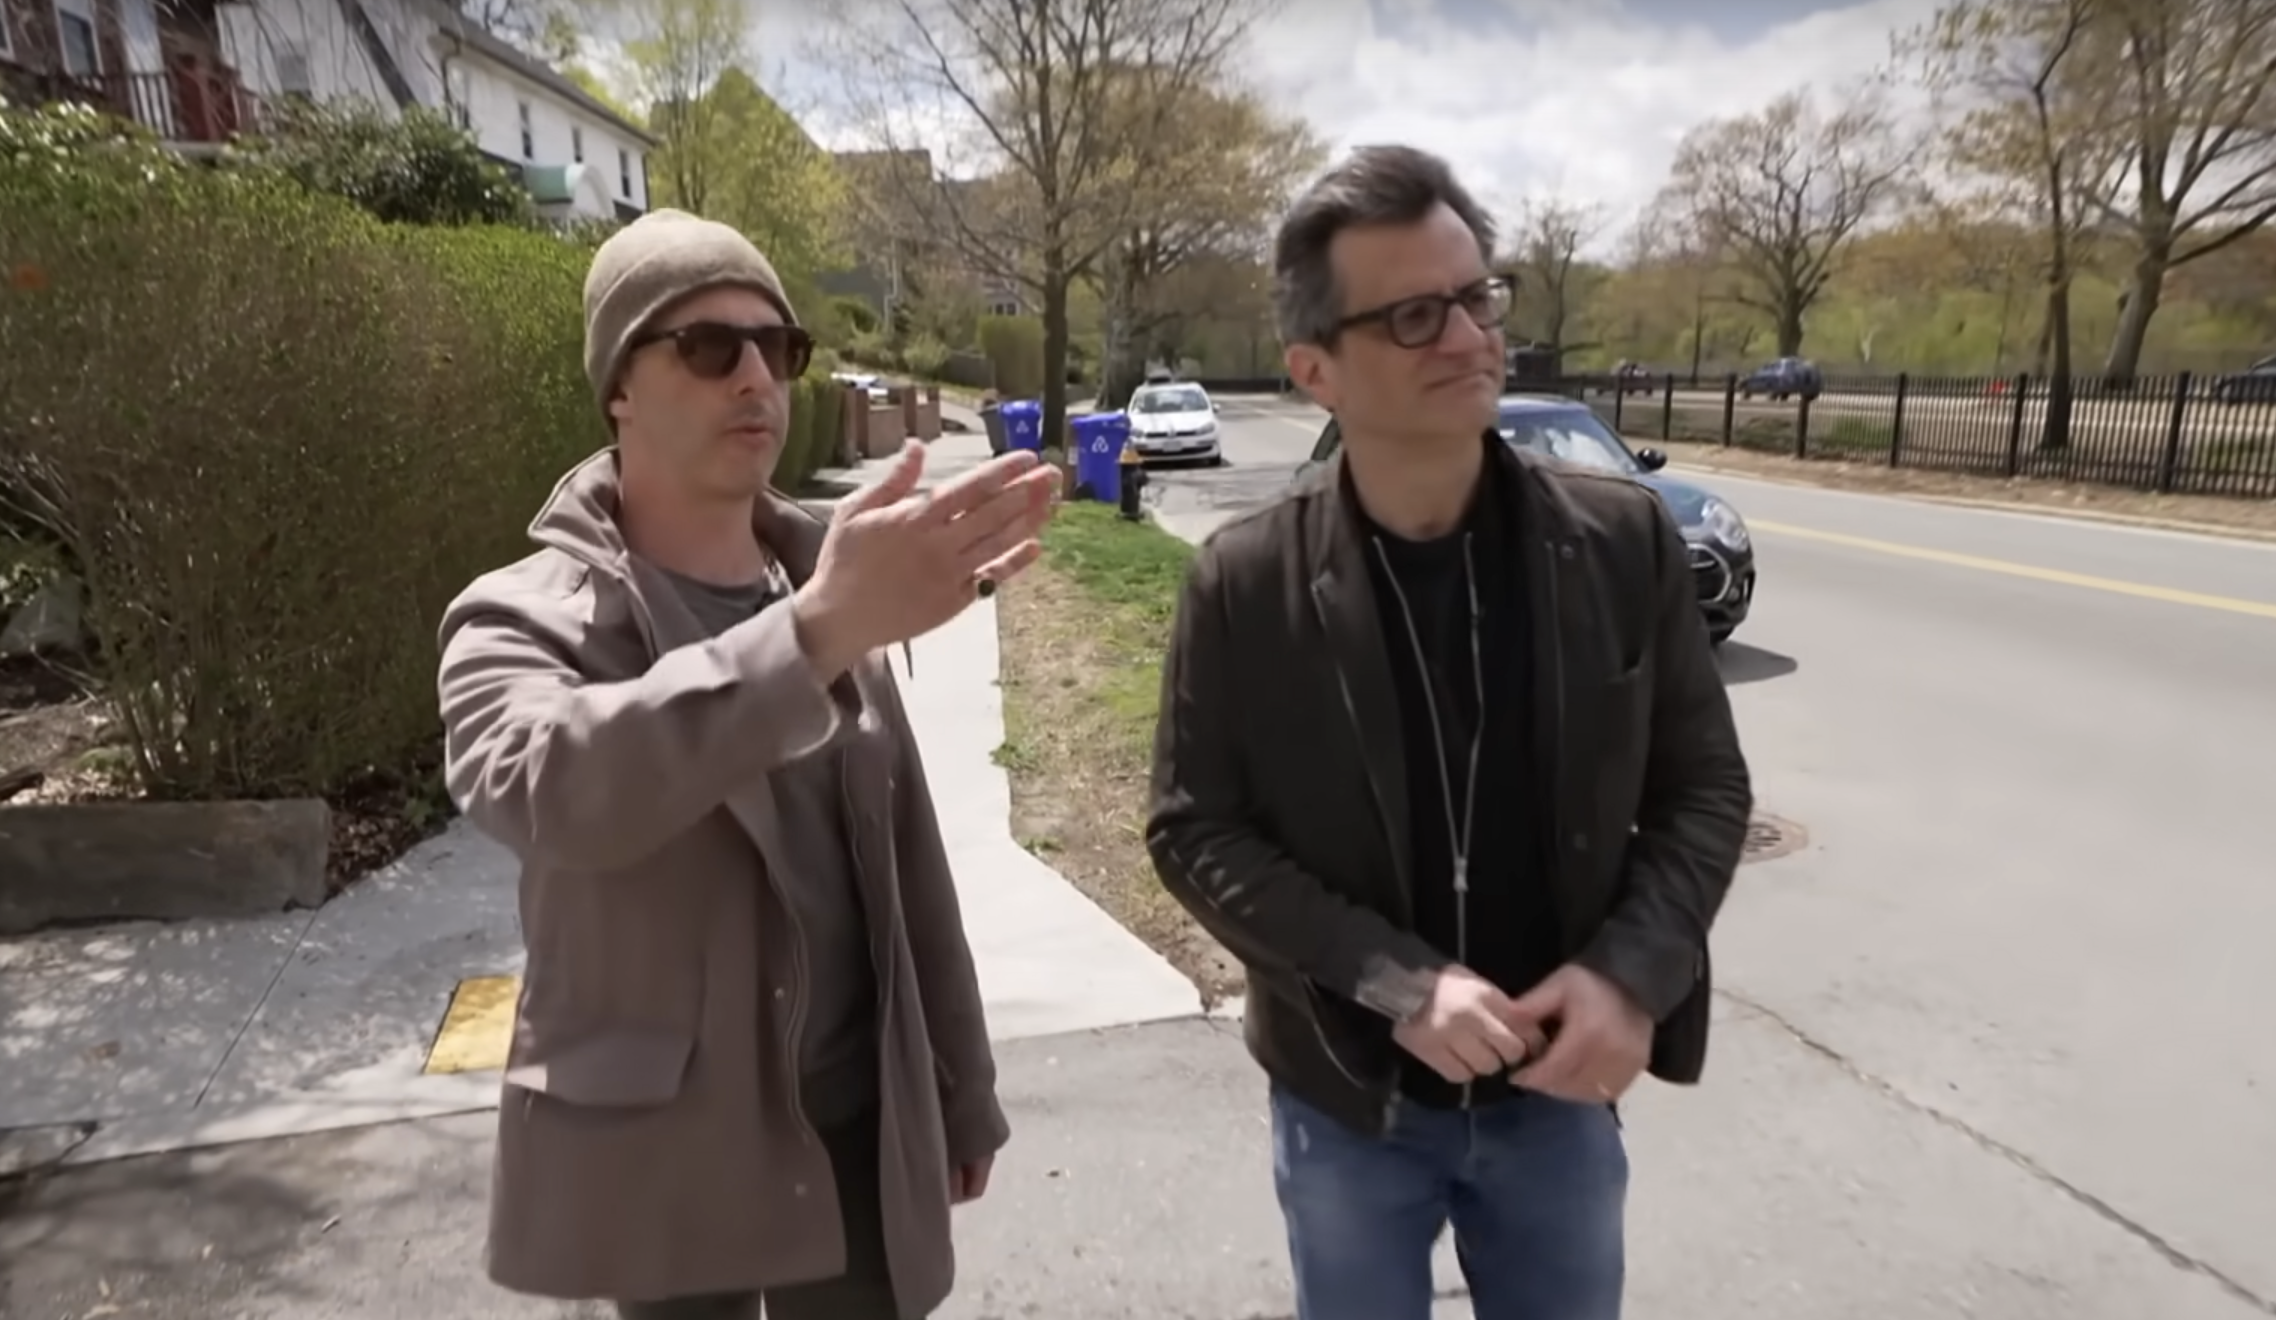 Two men in coats walk across a small street next to a much larger multi-lane roadway. The man on the left, wearing sunglasses, is Jeremy Strong. He is gesturing to the large road to his left. The man on the right, reporter Ben Mankiewicz, is looking in the direction of Strong's gesture.